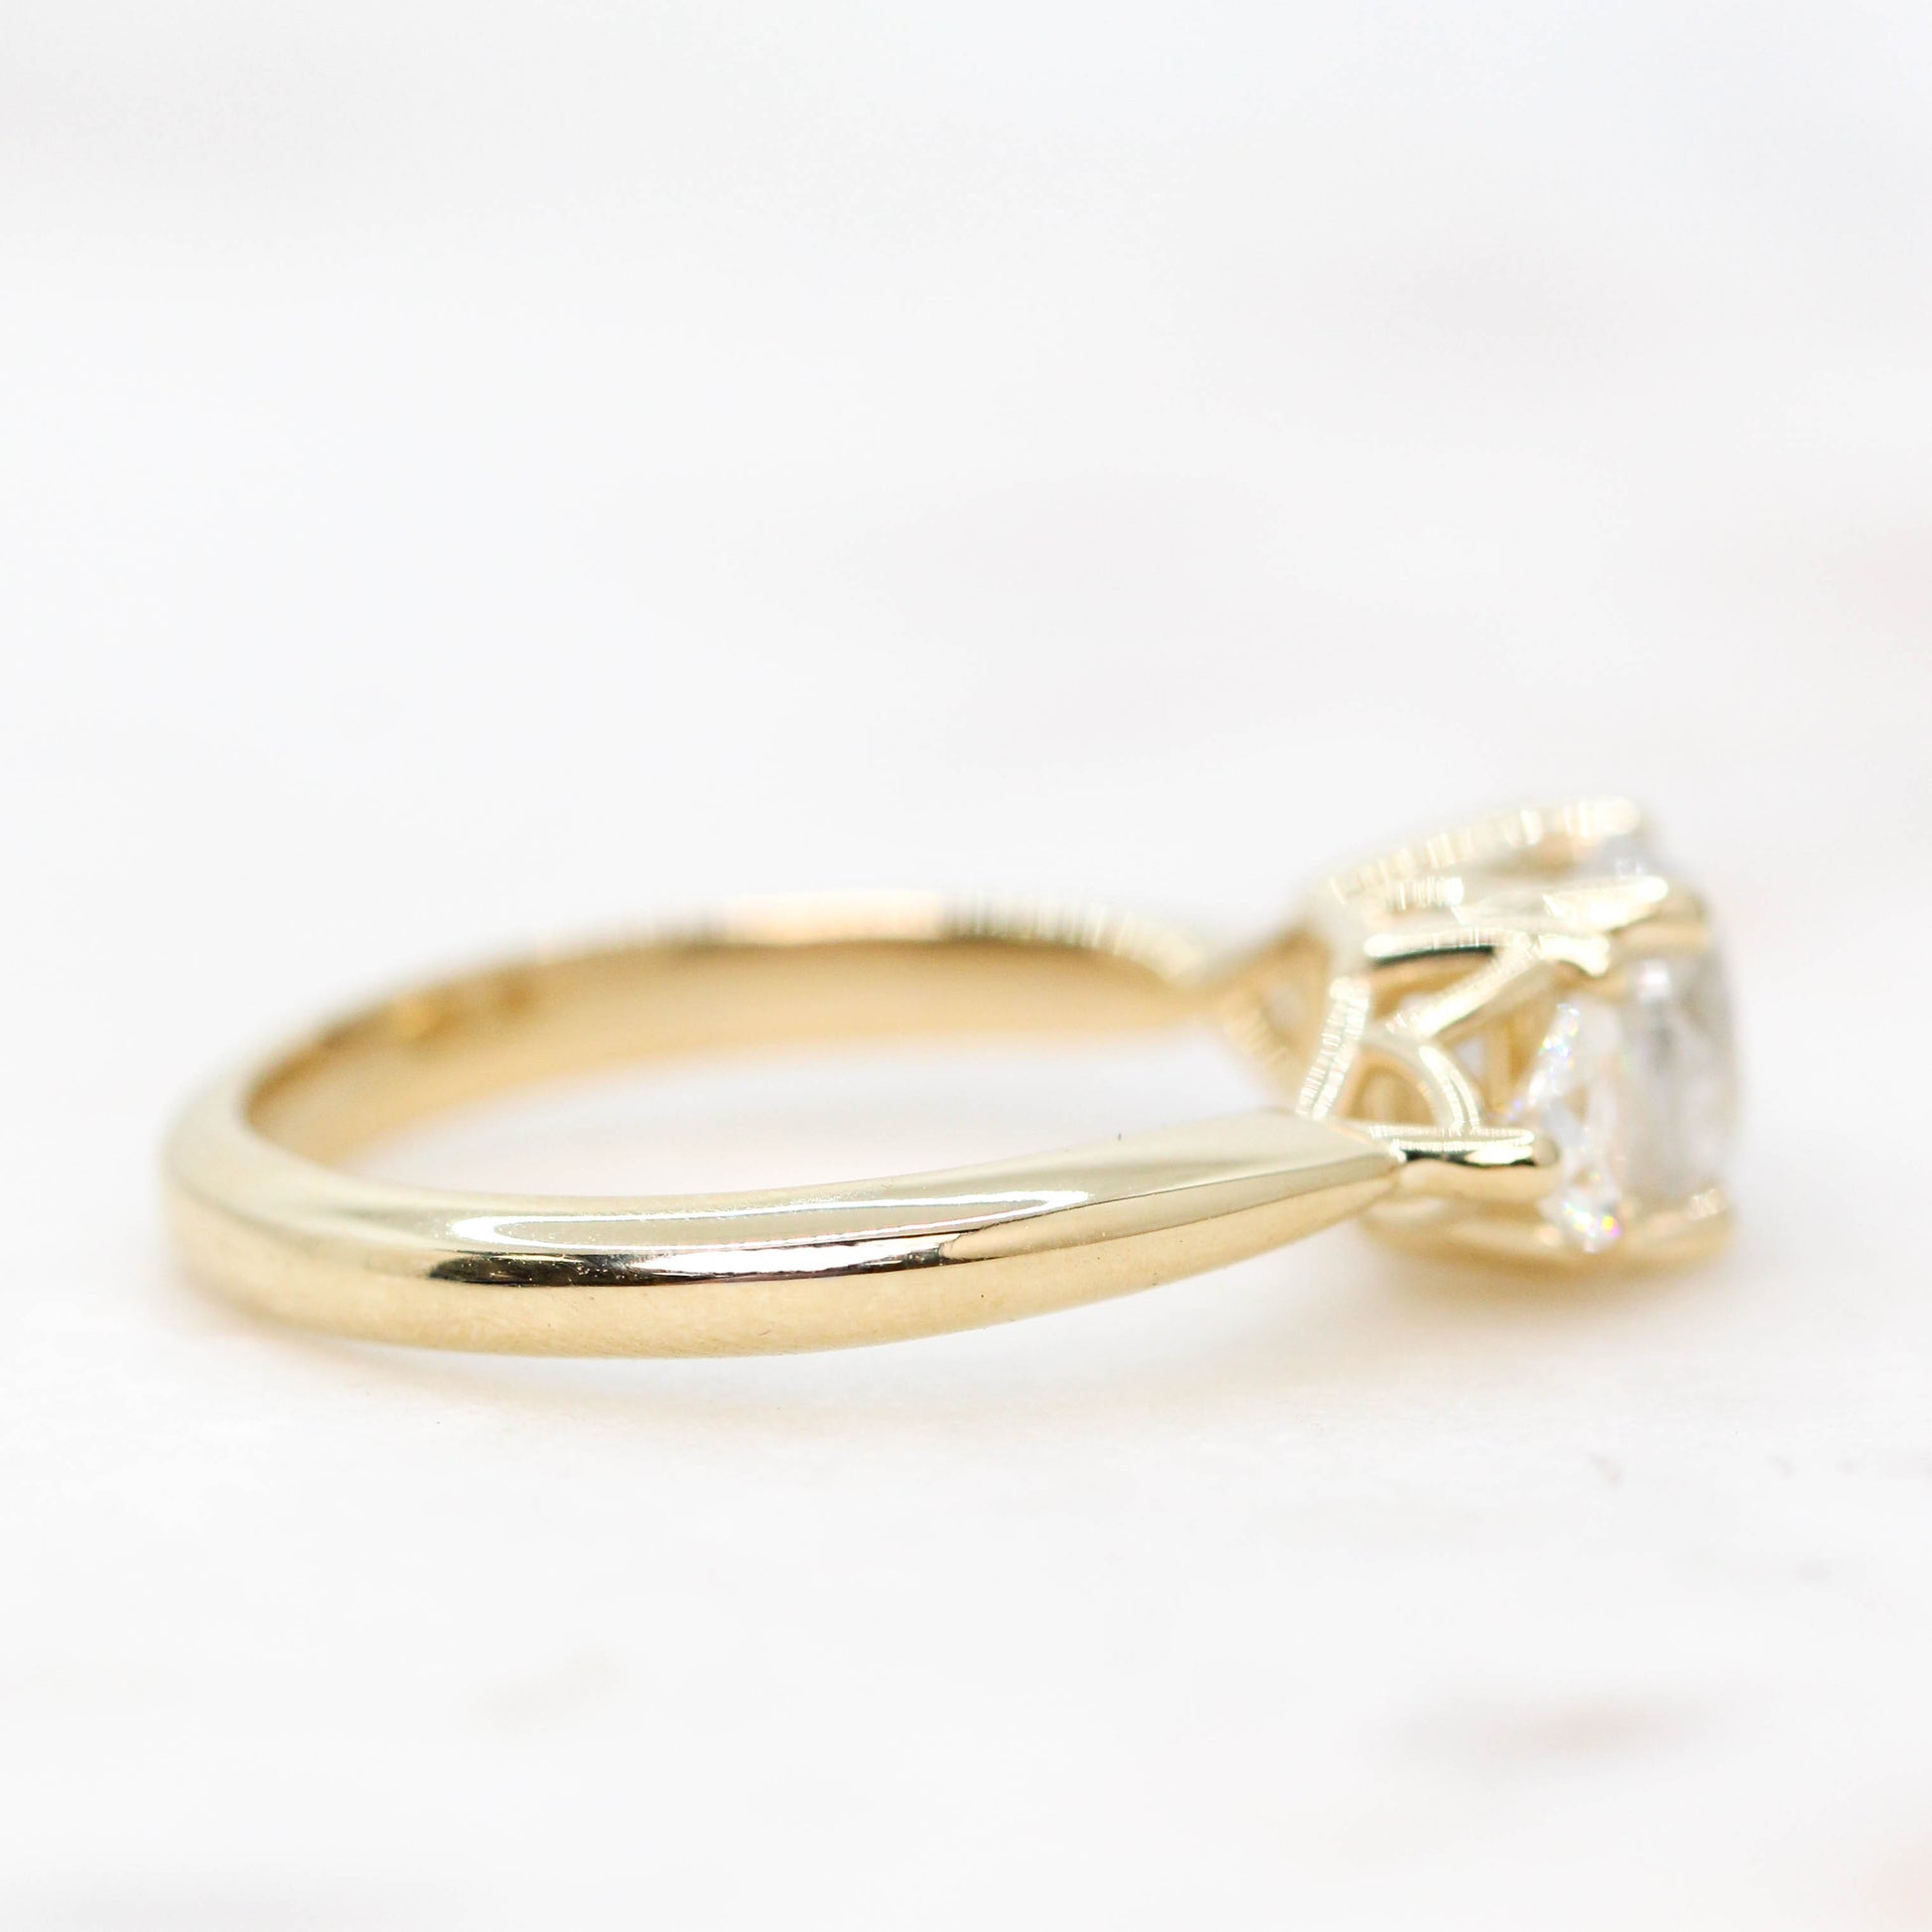 Nolen Ring with a 1.23 Carat White Celestial Diamond and White Accent Diamonds in 14k Yellow Gold - Ready to Size and Ship - Midwinter Co. Alternative Bridal Rings and Modern Fine Jewelry